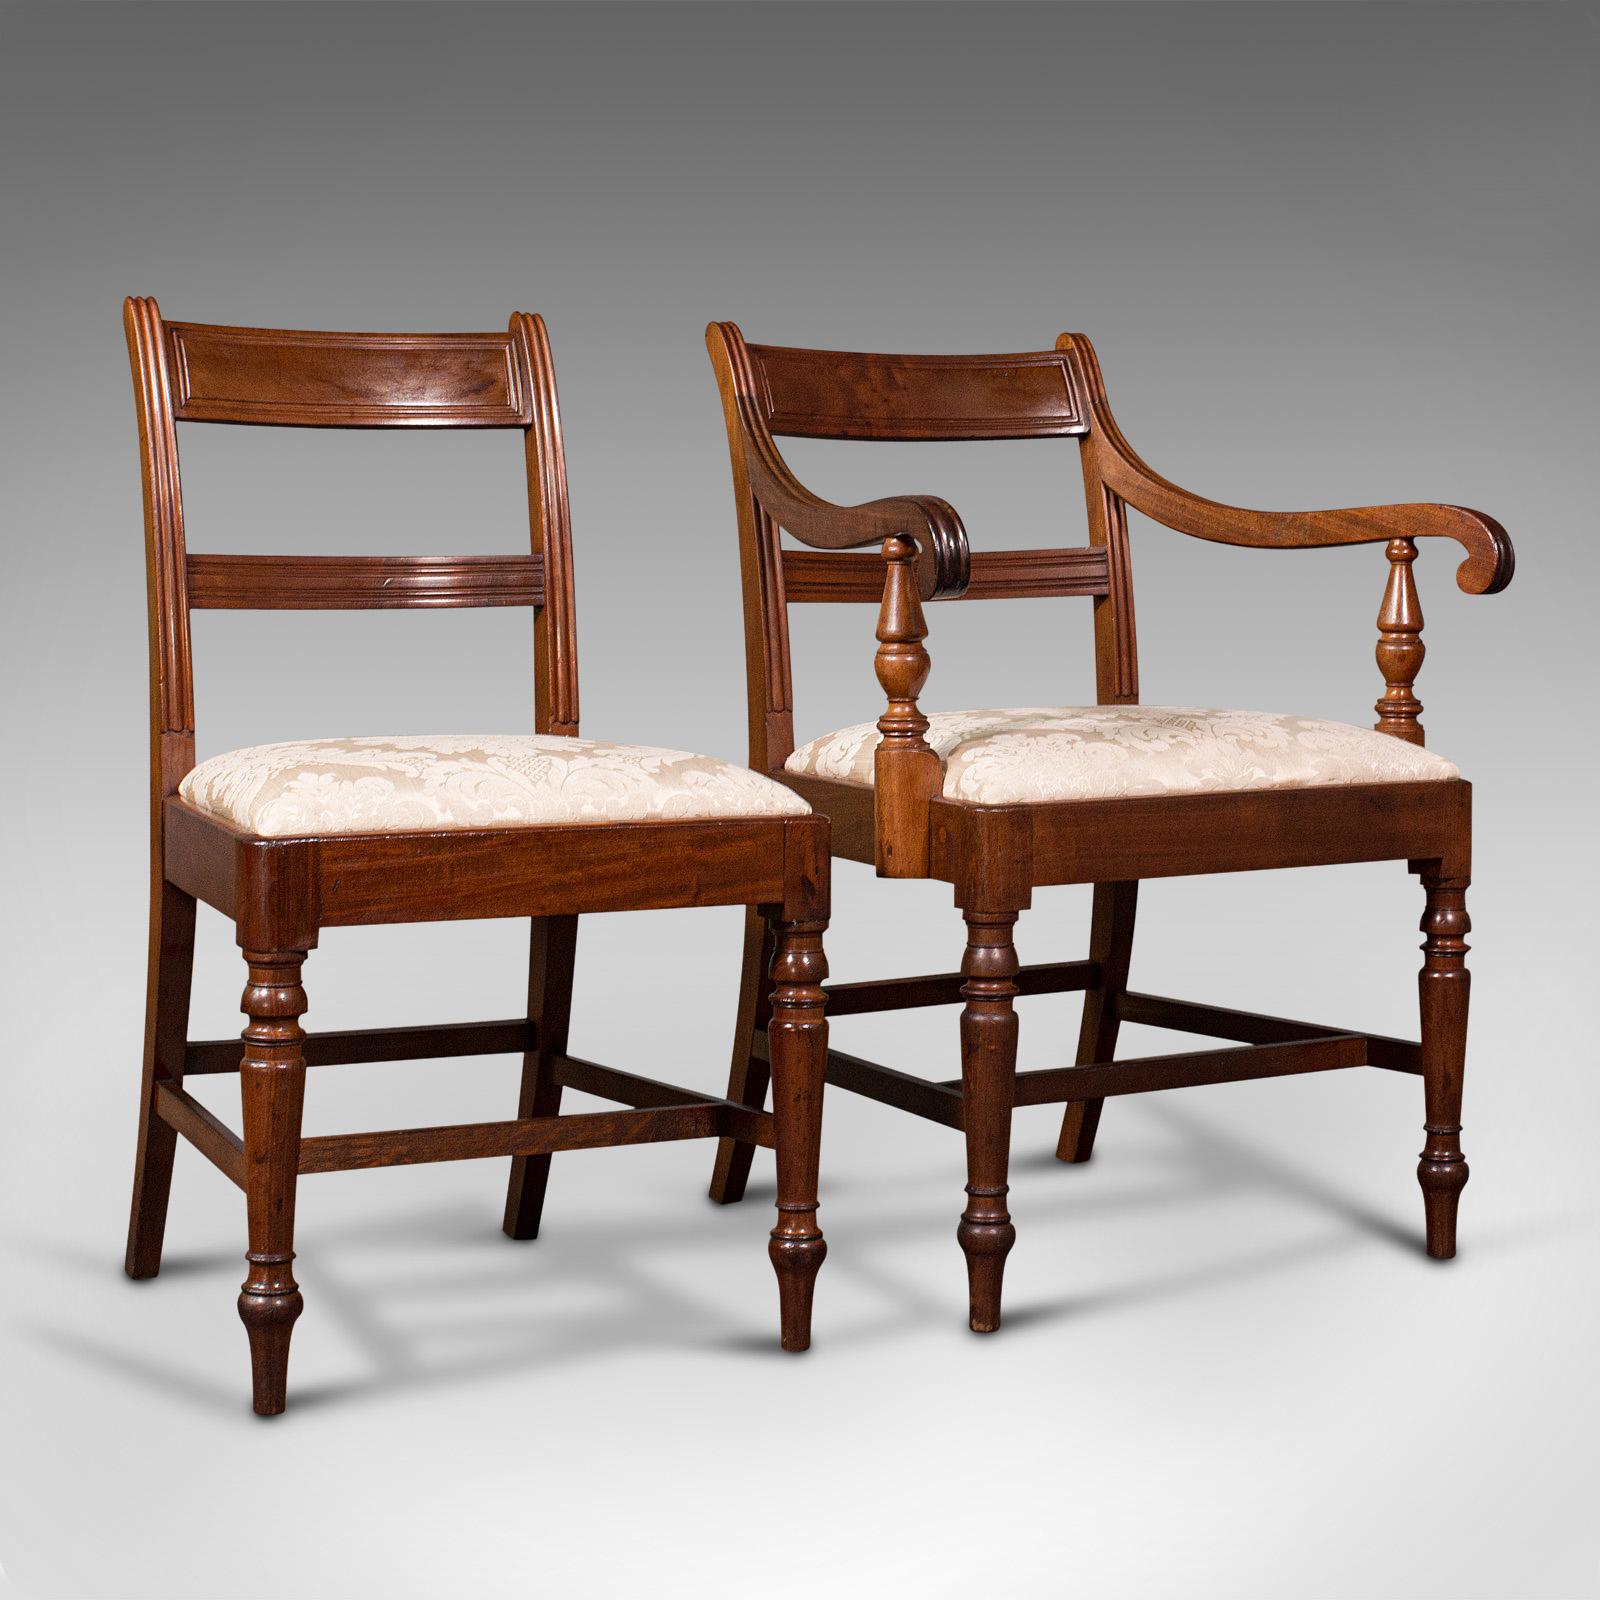 British Set of 4, Antique Dining Chairs, English, Mahogany, Pair of Carvers, Regency